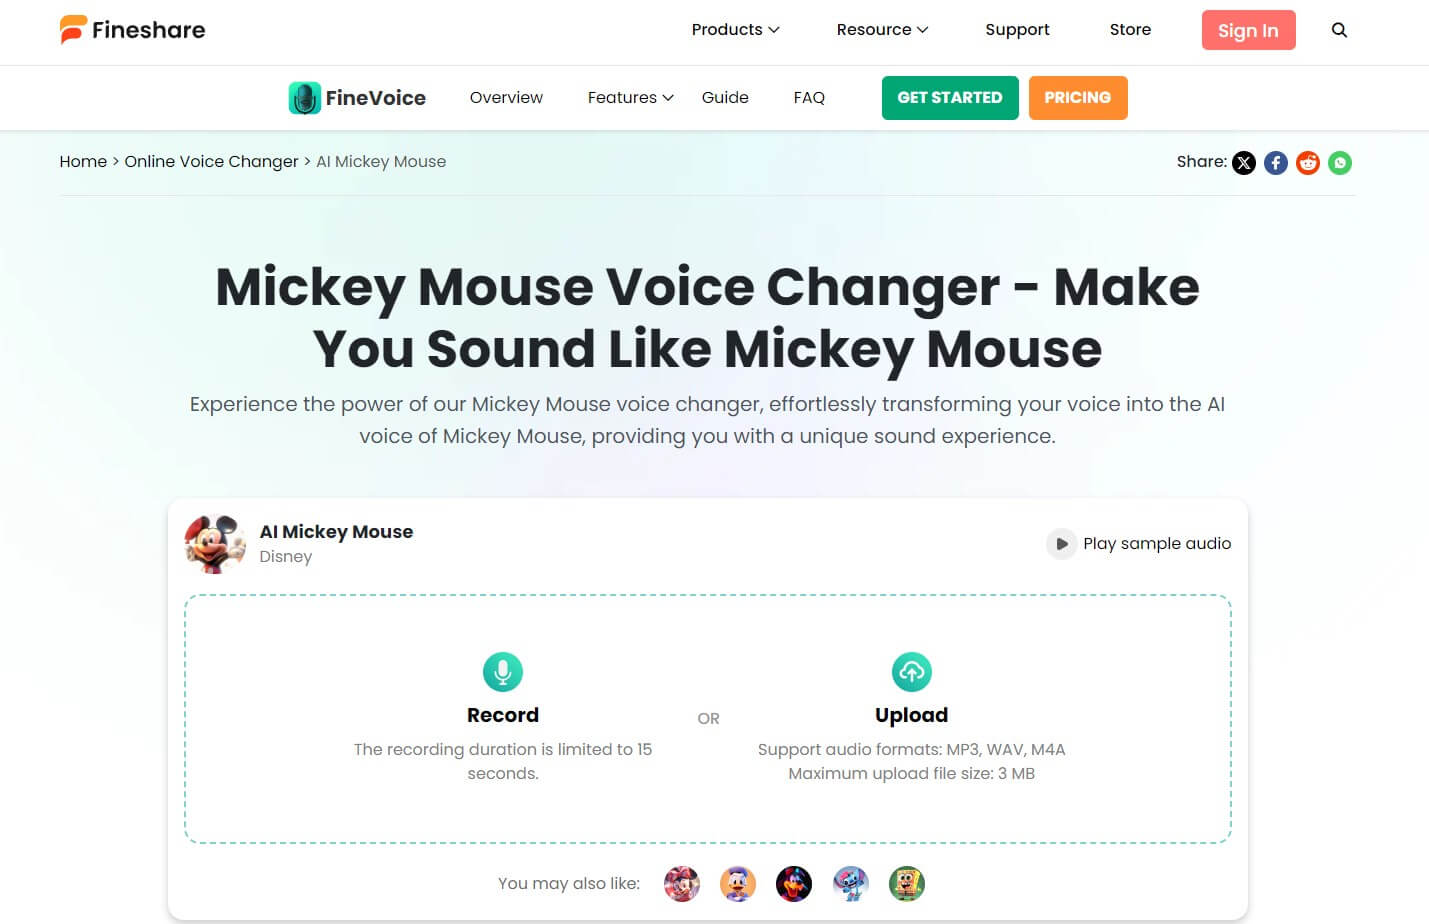 fineshare finevoice mickey mouse voice changer